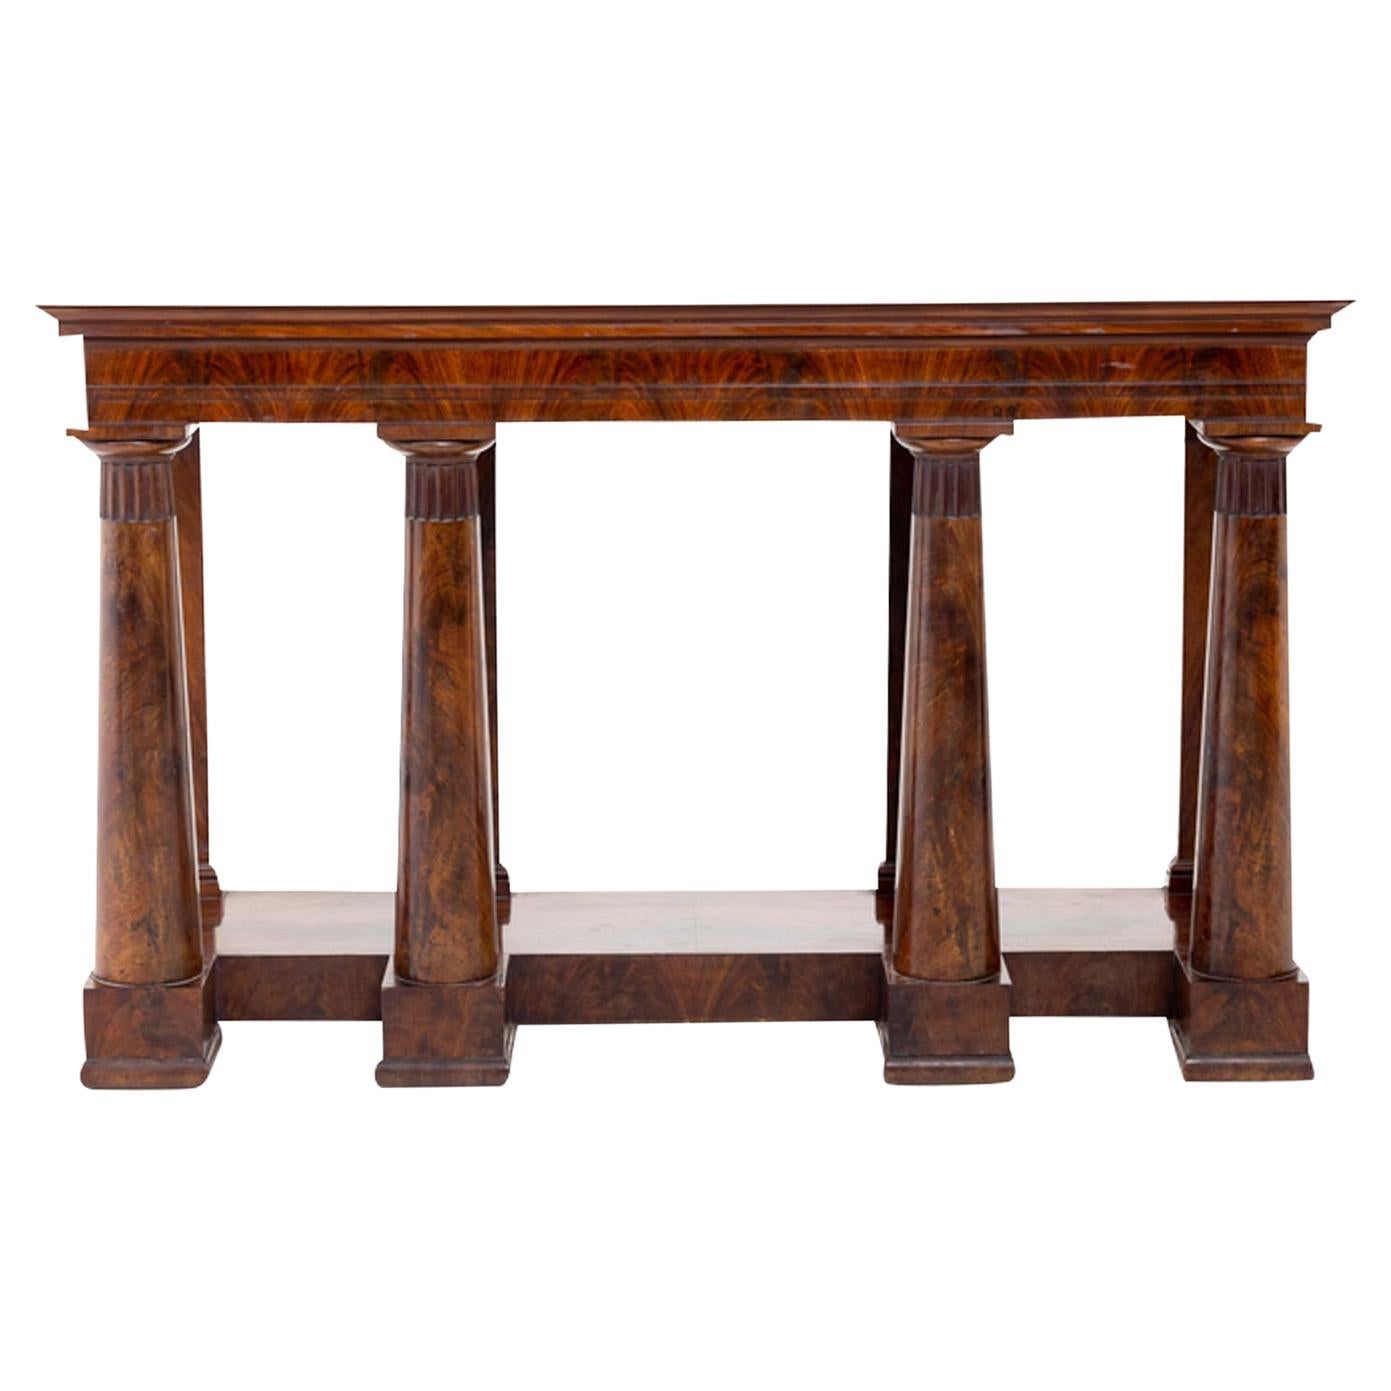 19th Century Italian Freestanding Mahogany Center Table - Antique Console Table For Sale